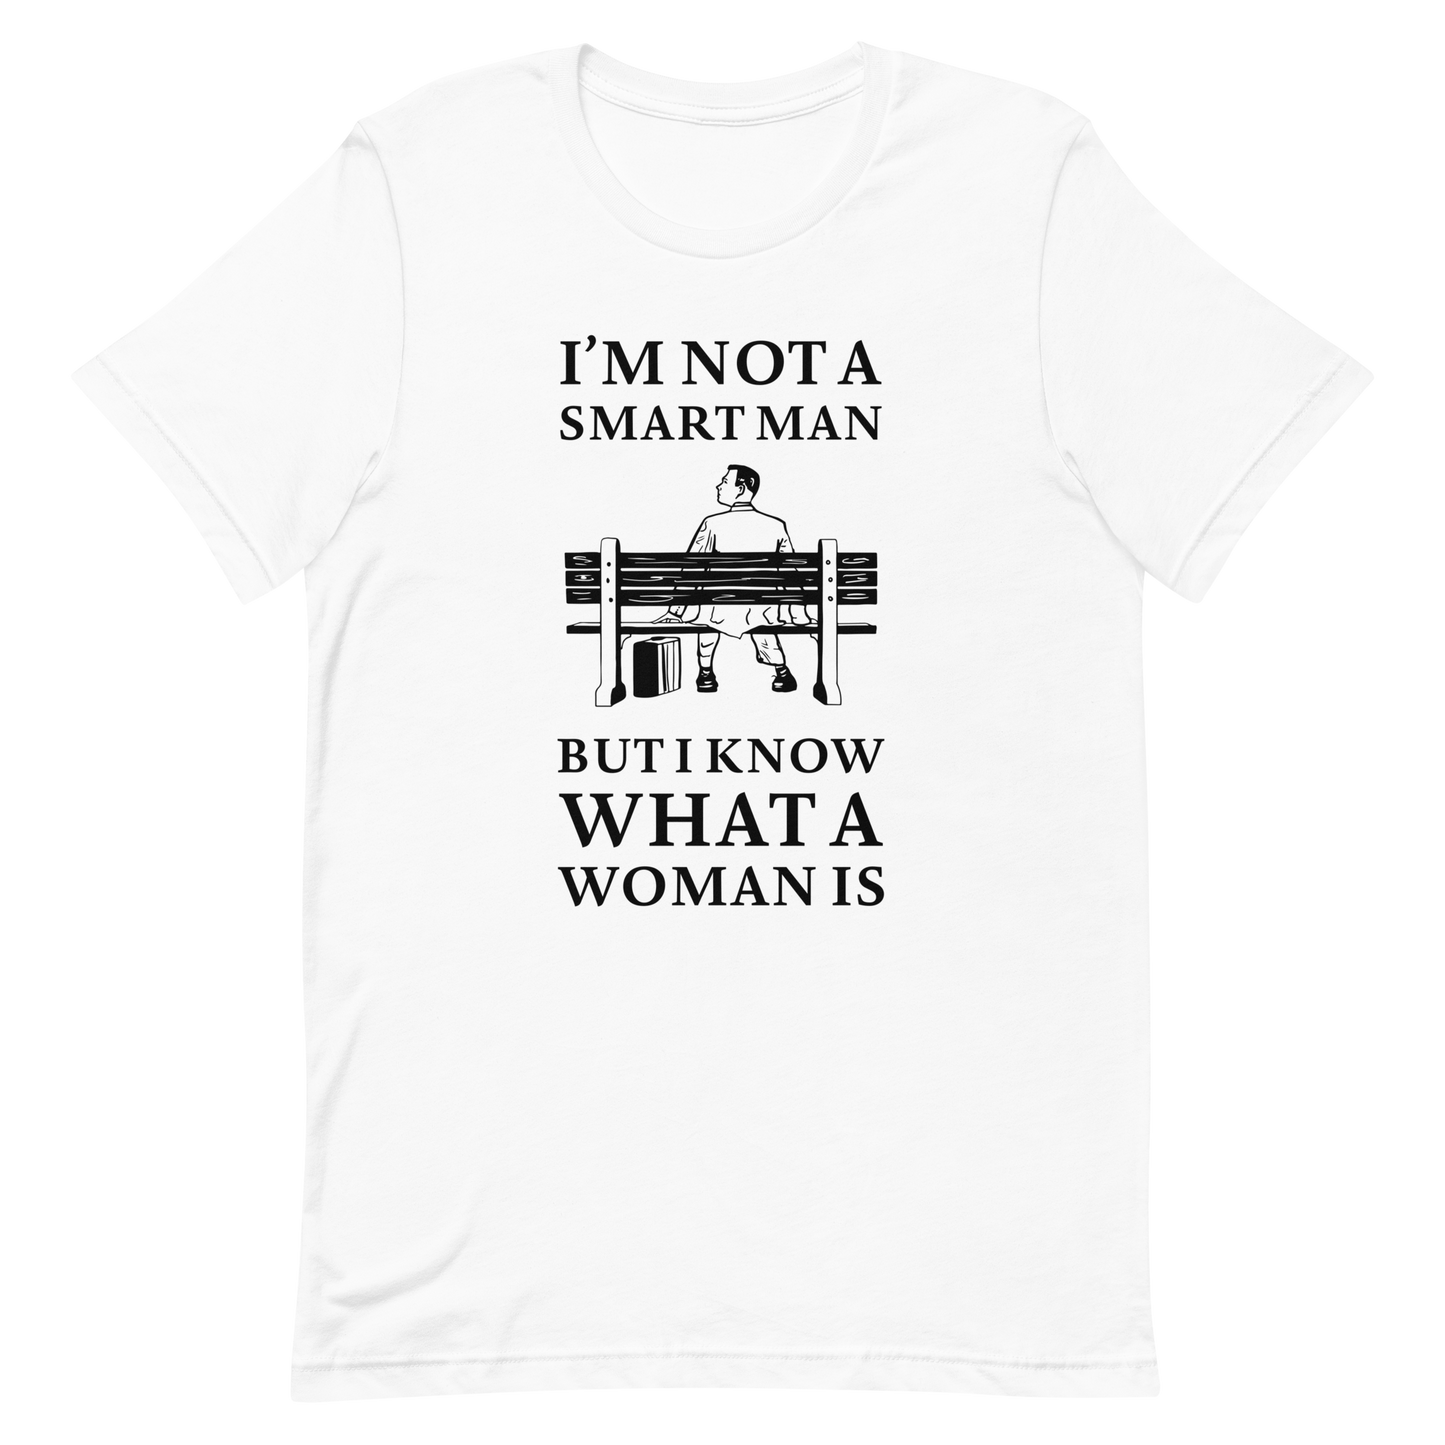 I Know What a Woman Is T-shirt